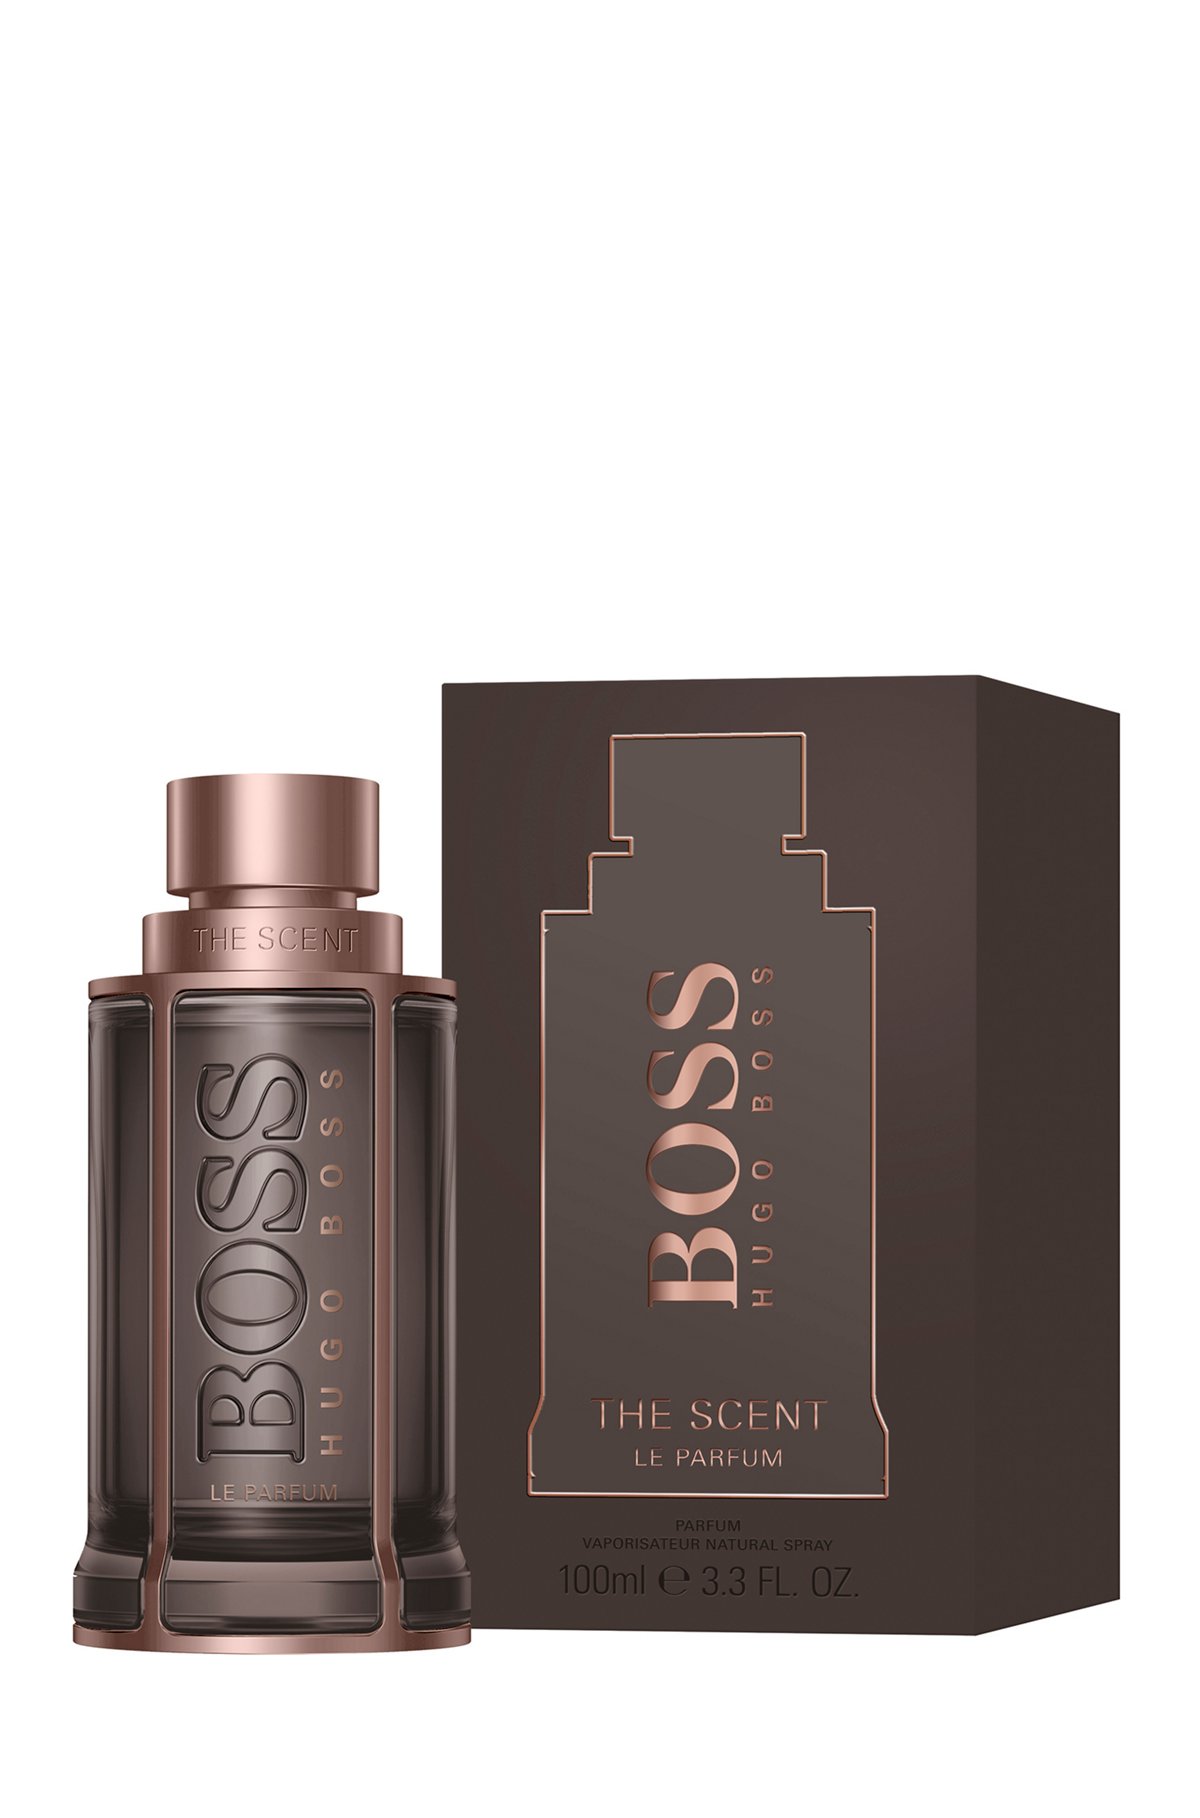 interferentie Hoogte Verraad BOSS - BOSS The Scent Le Parfum for Him 100 ml